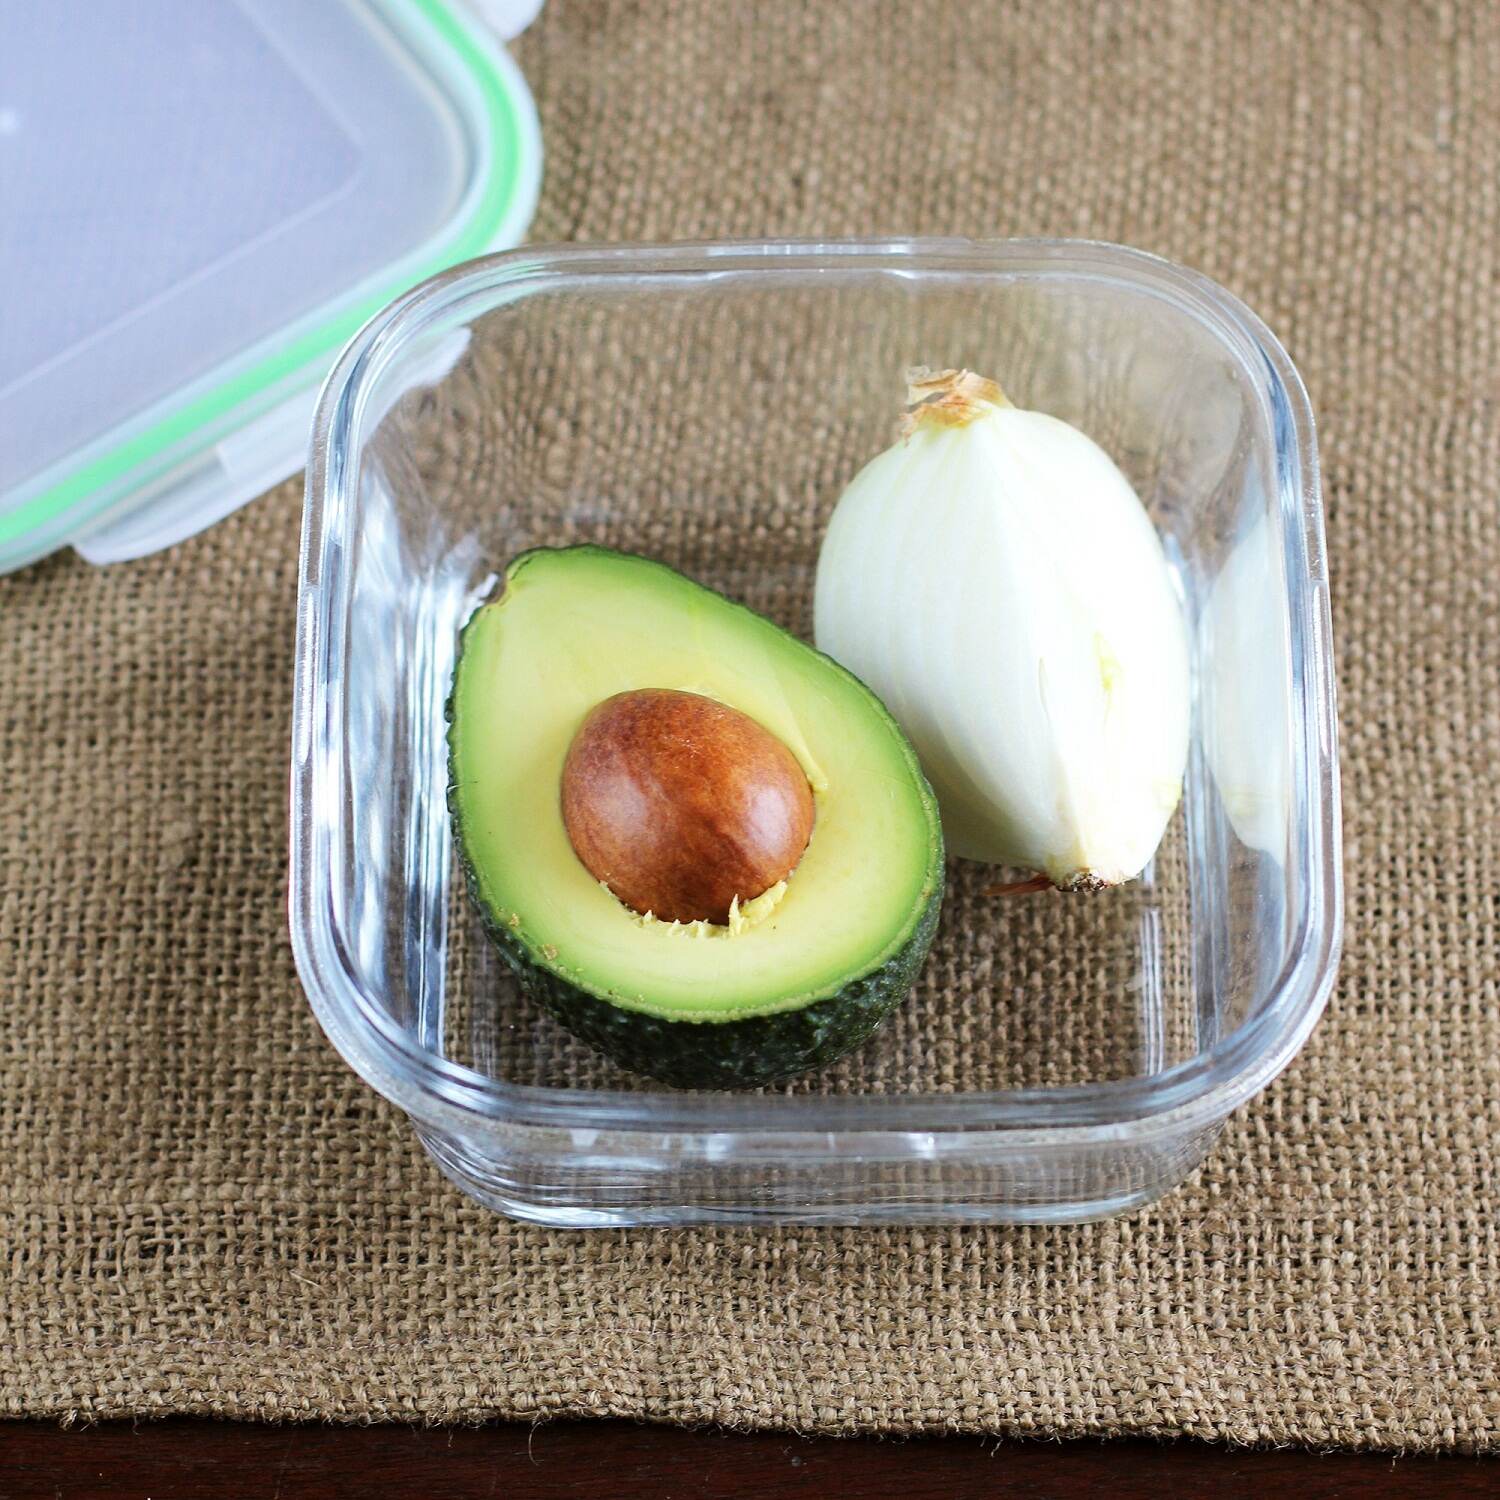 How To Store Cut Avocados